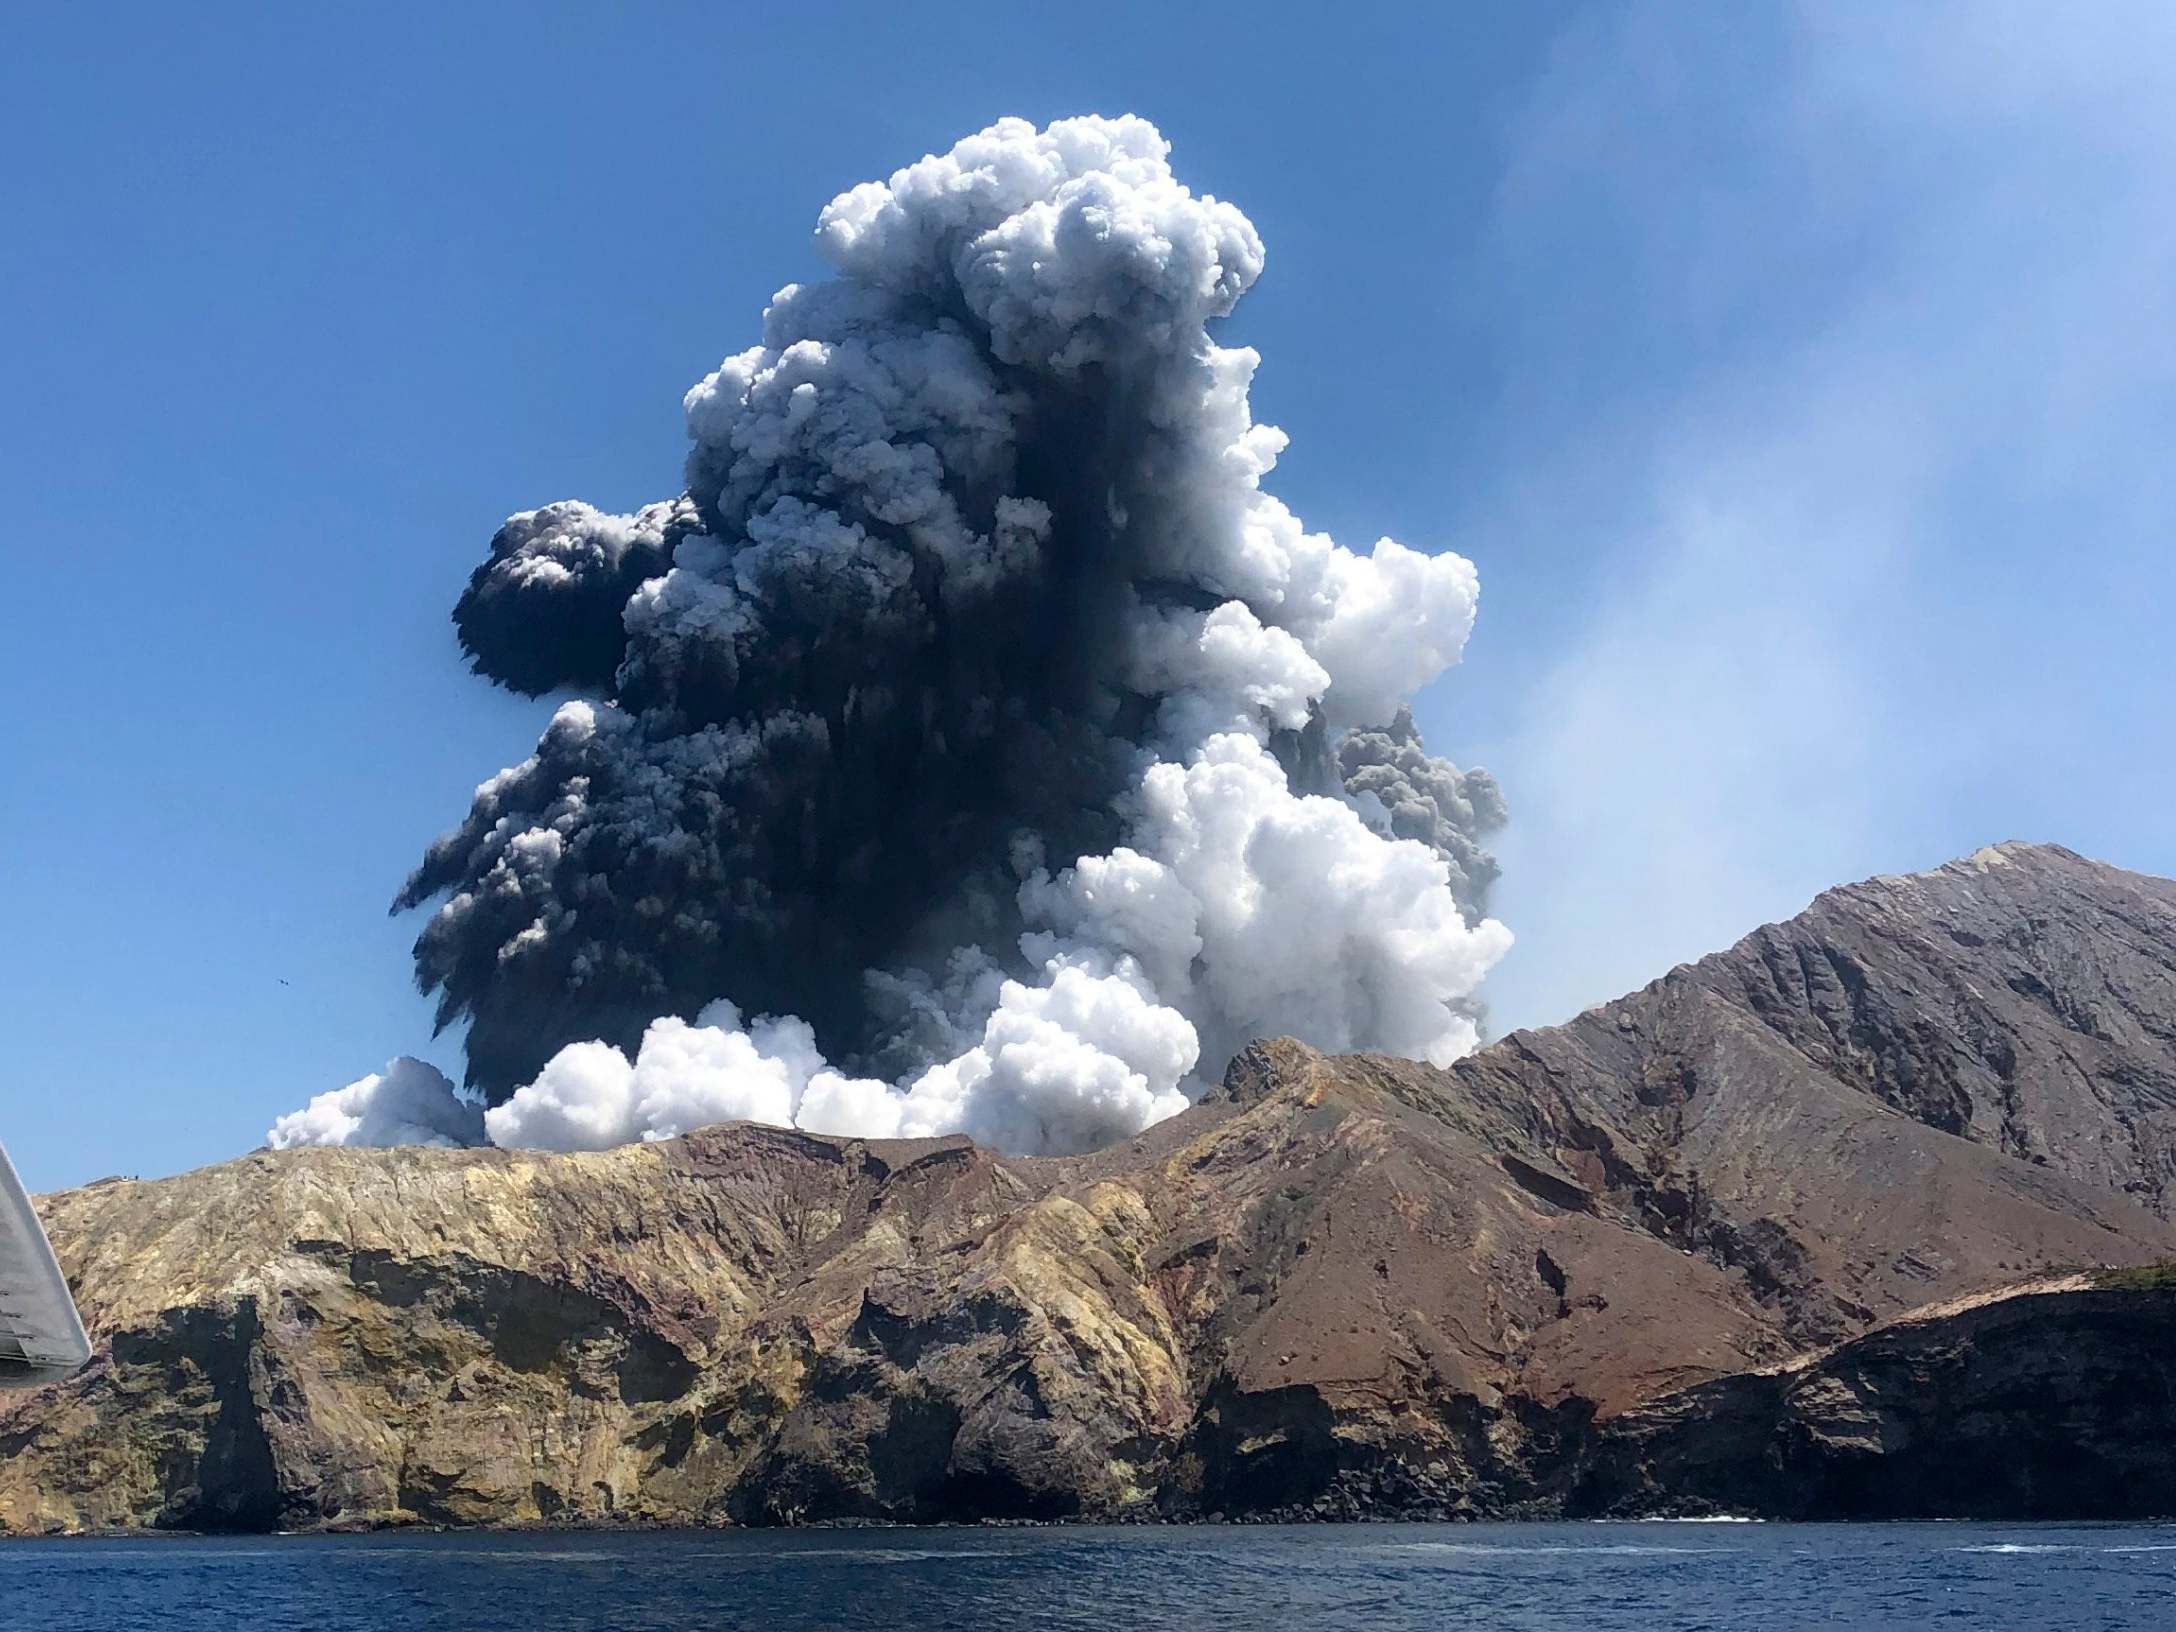 Volcano erupted on the isolated White Island off the coast of New Zealand on 9 December